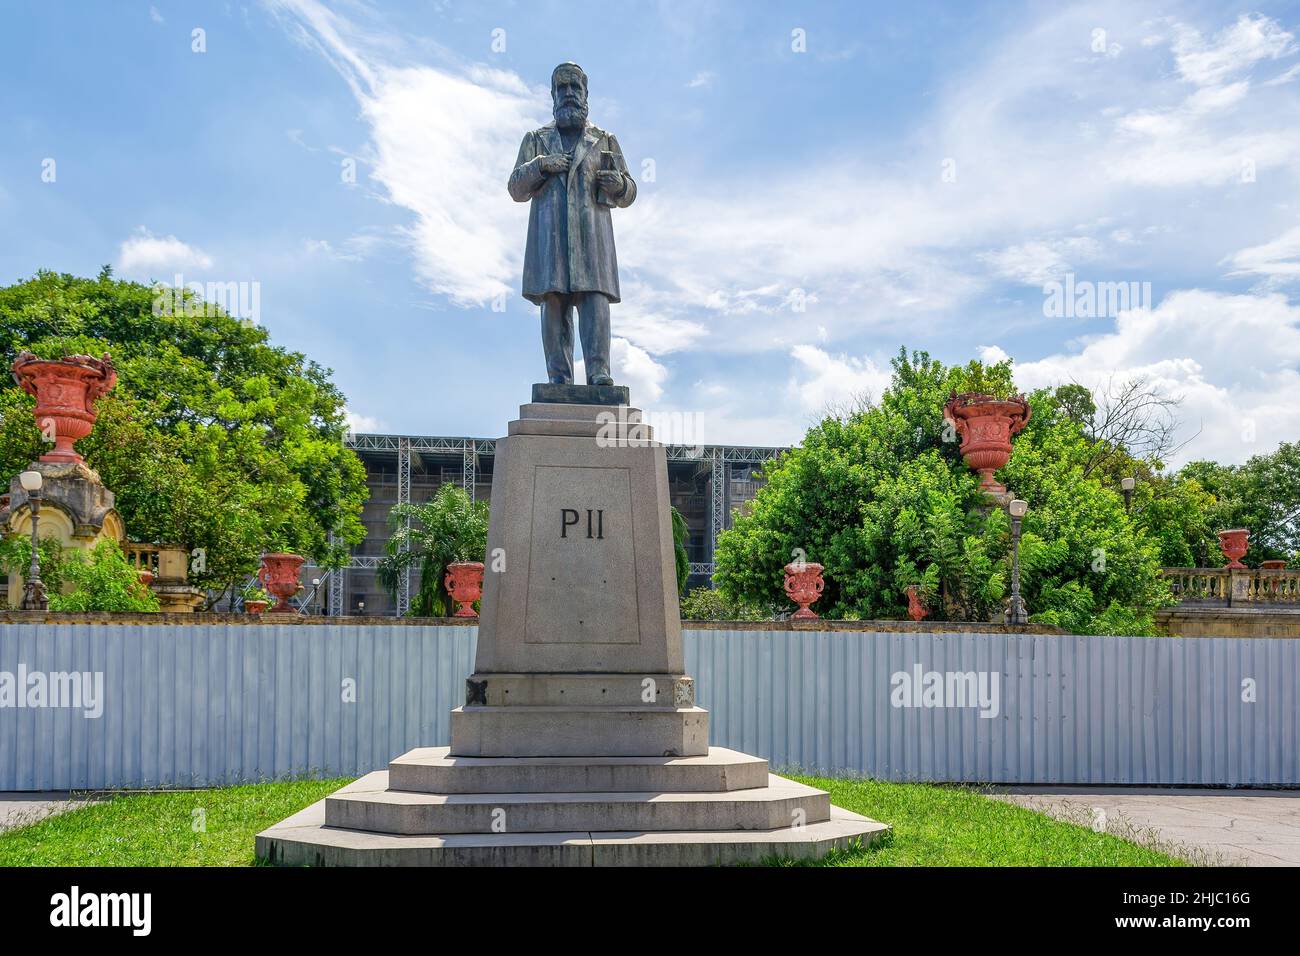 Sculpture or statue of Don Pedro II in Quinta da Boa Vista which is a public park of great historical importance located in the Sao Cristovao neighbou Stock Photo